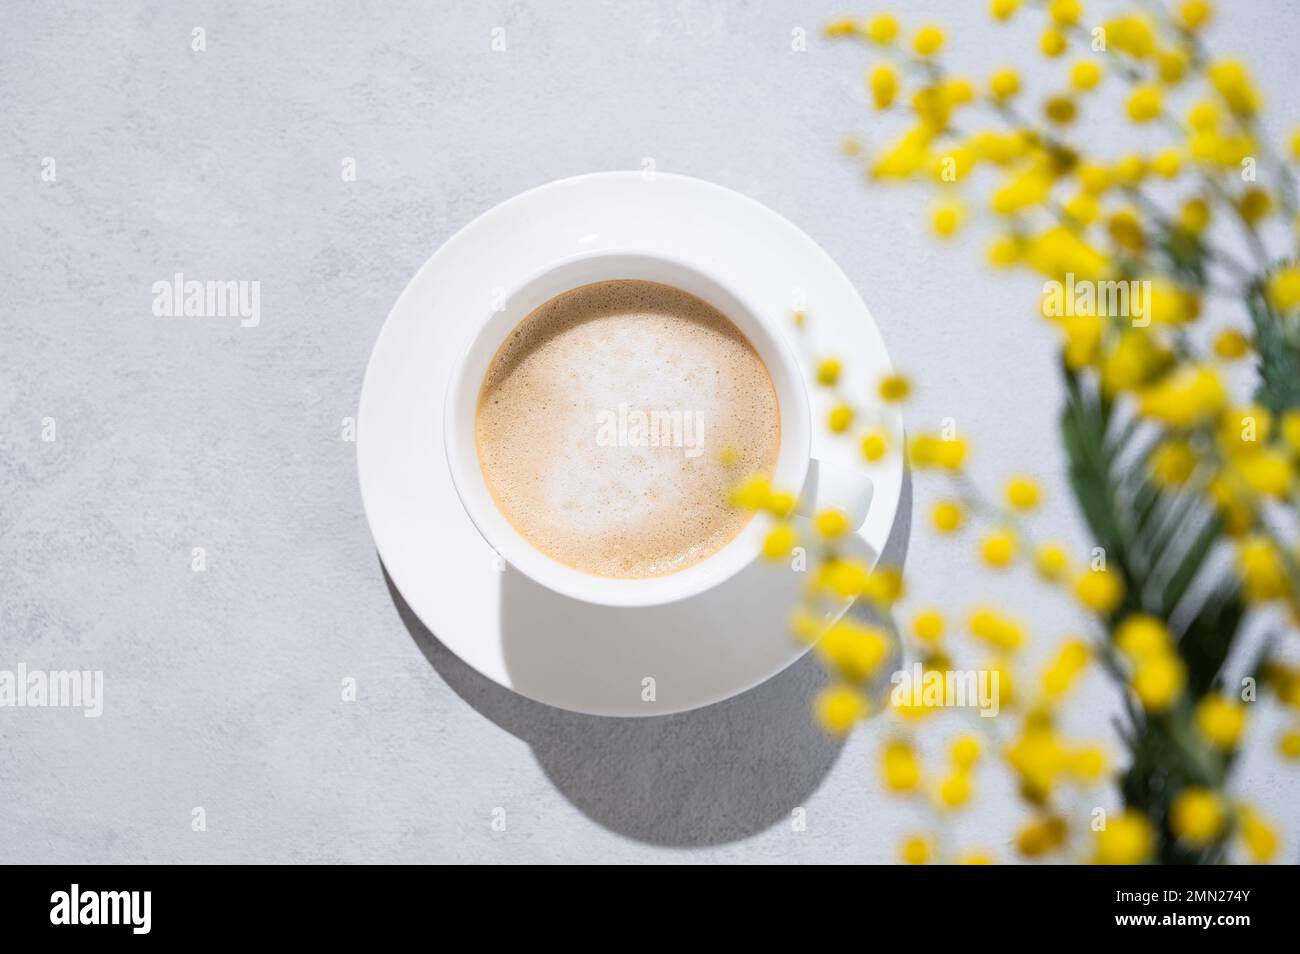 A spring bouquet with yellow mimosa flowers over a cup of coffee  cappuccino on a light background with shadow. Concept of 8 March, happy women's day. Stock Photo